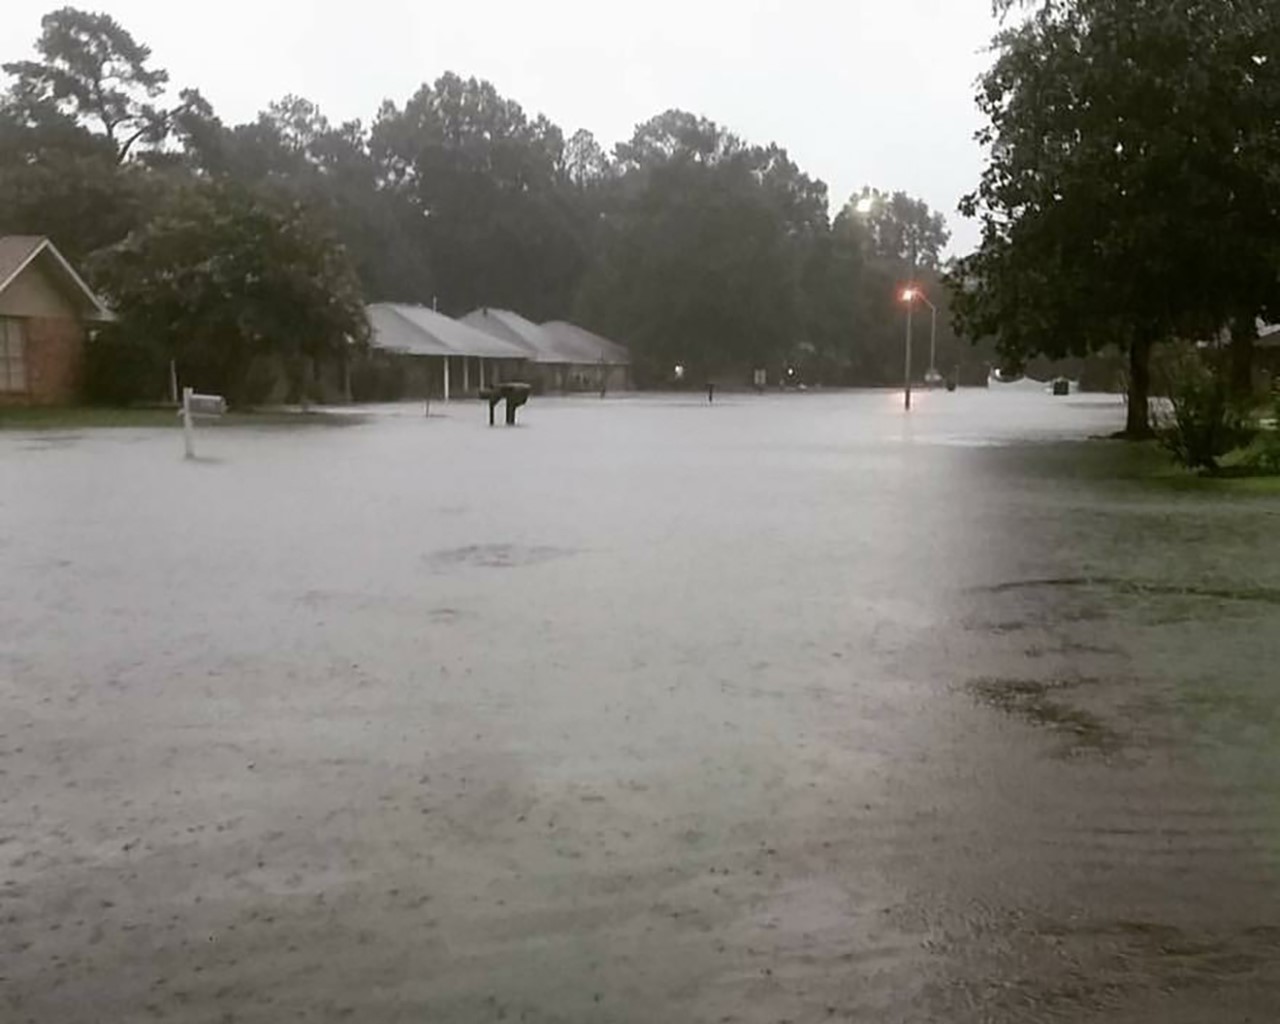 Kelly Munson's neighborhood in the East Baton Rouge parish during August's historic flooding. Photo by Kelly Munson